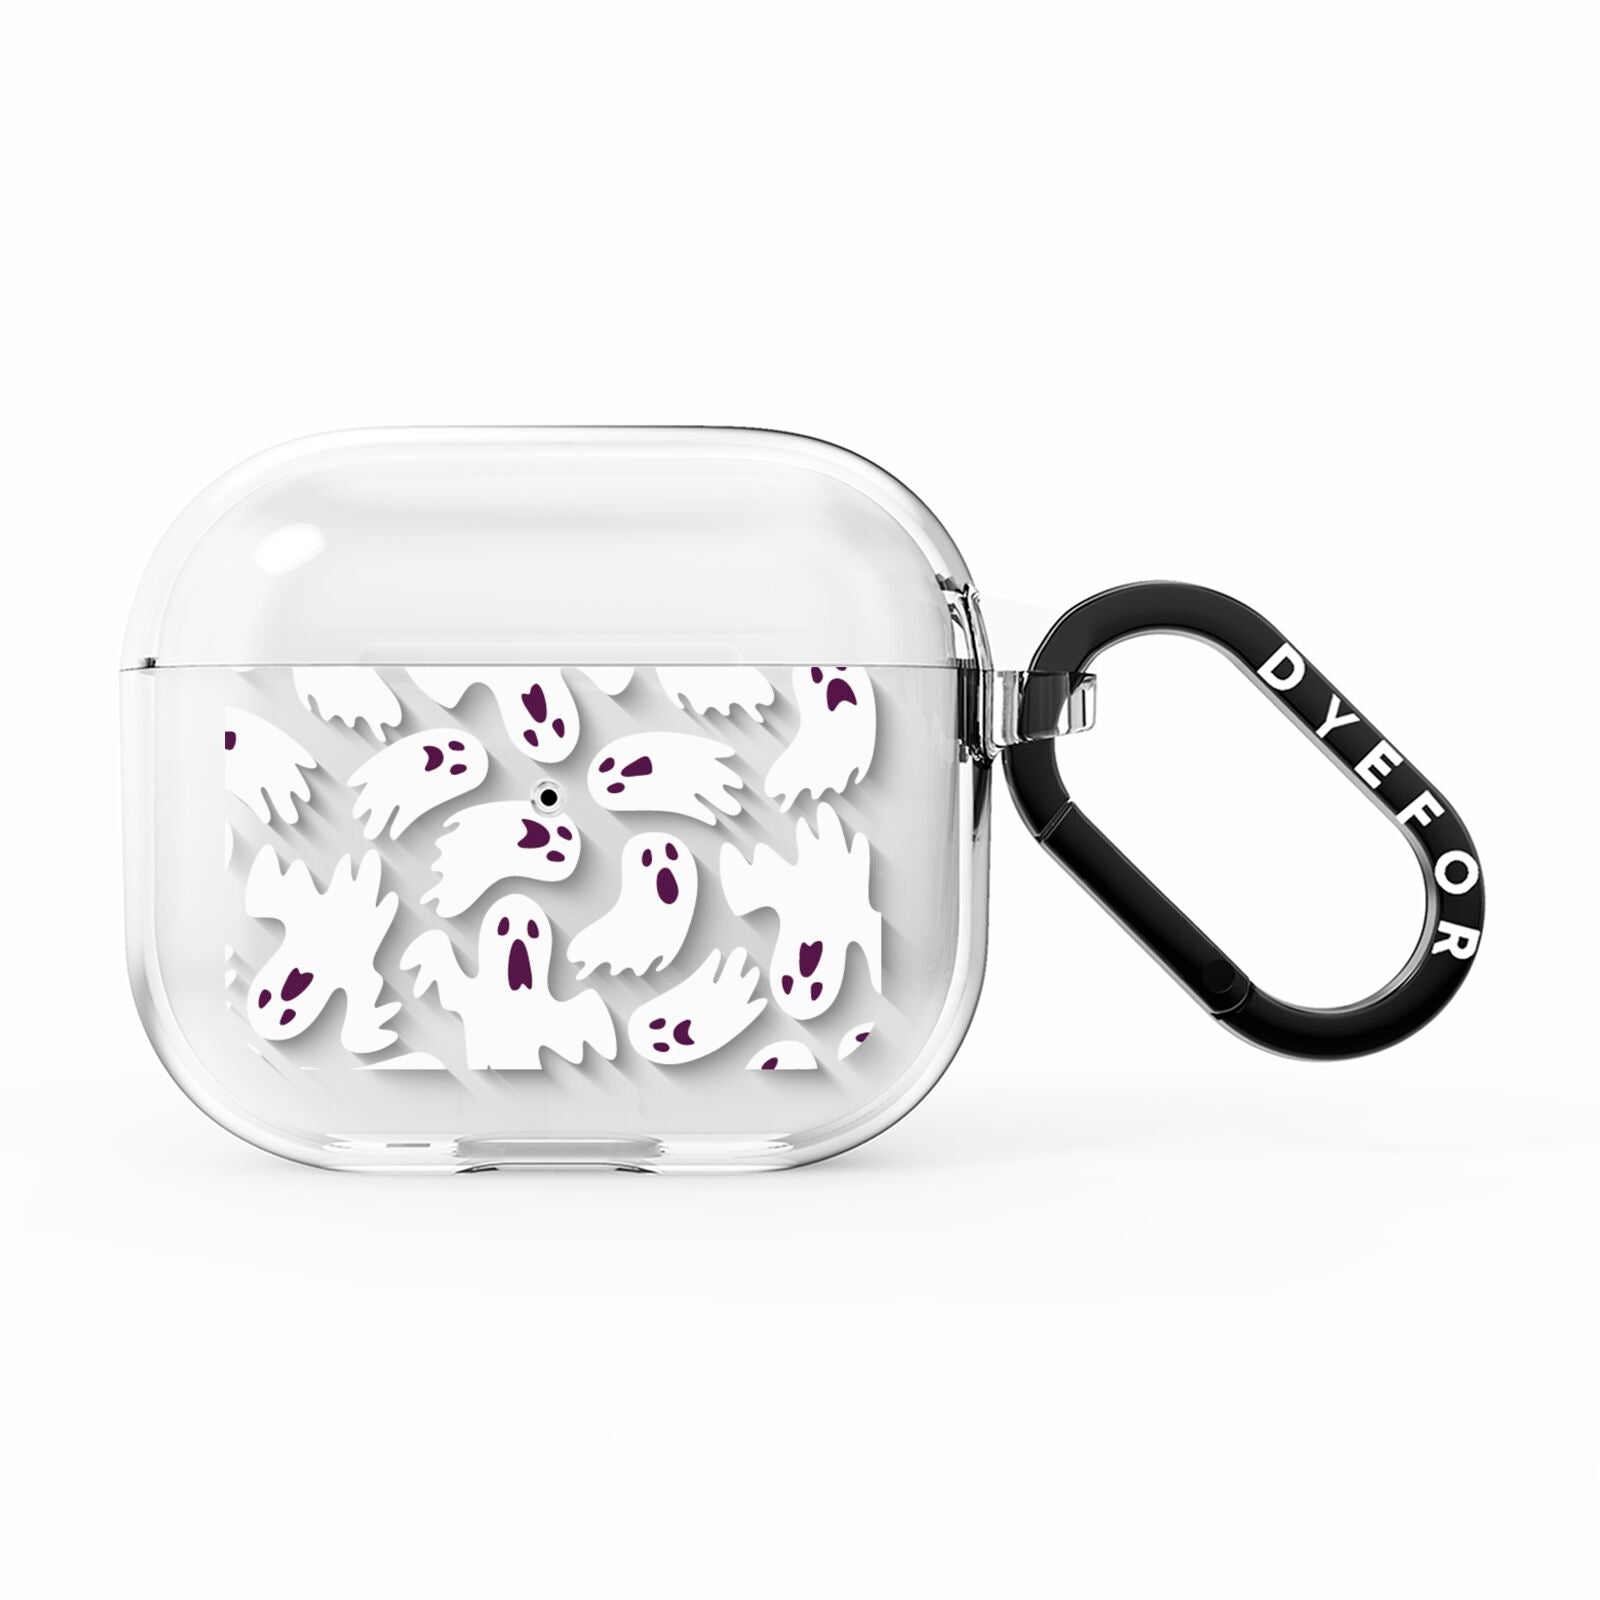 Crowd of Ghosts with Transparent Background AirPods Clear Case 3rd Gen